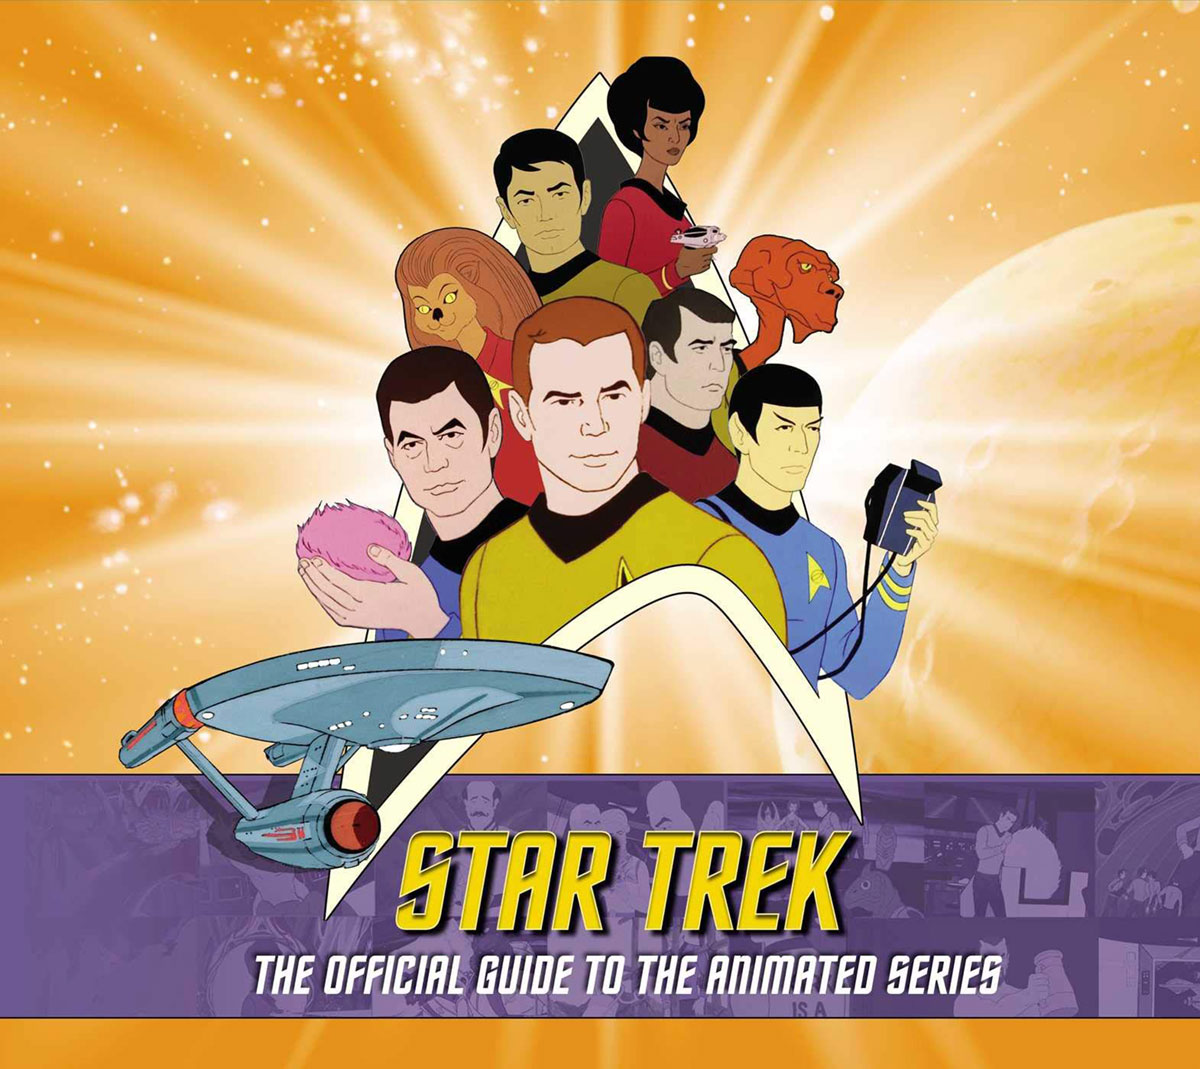 Official Guide to Star Trek: The Animated Series to be Released Later